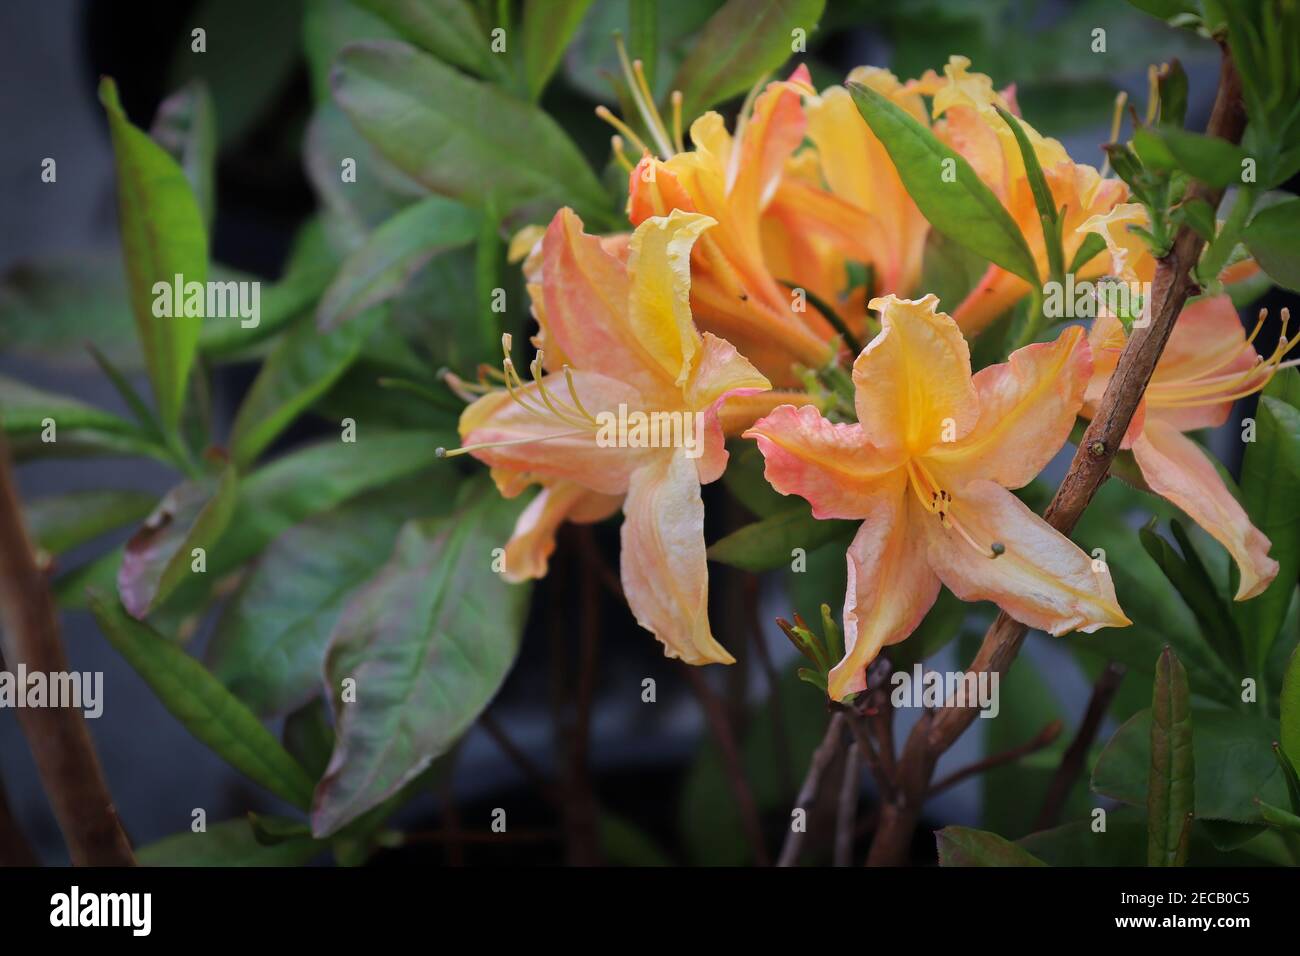 Yellow orange azalea blossoms blooming on a woody branch Stock Photo